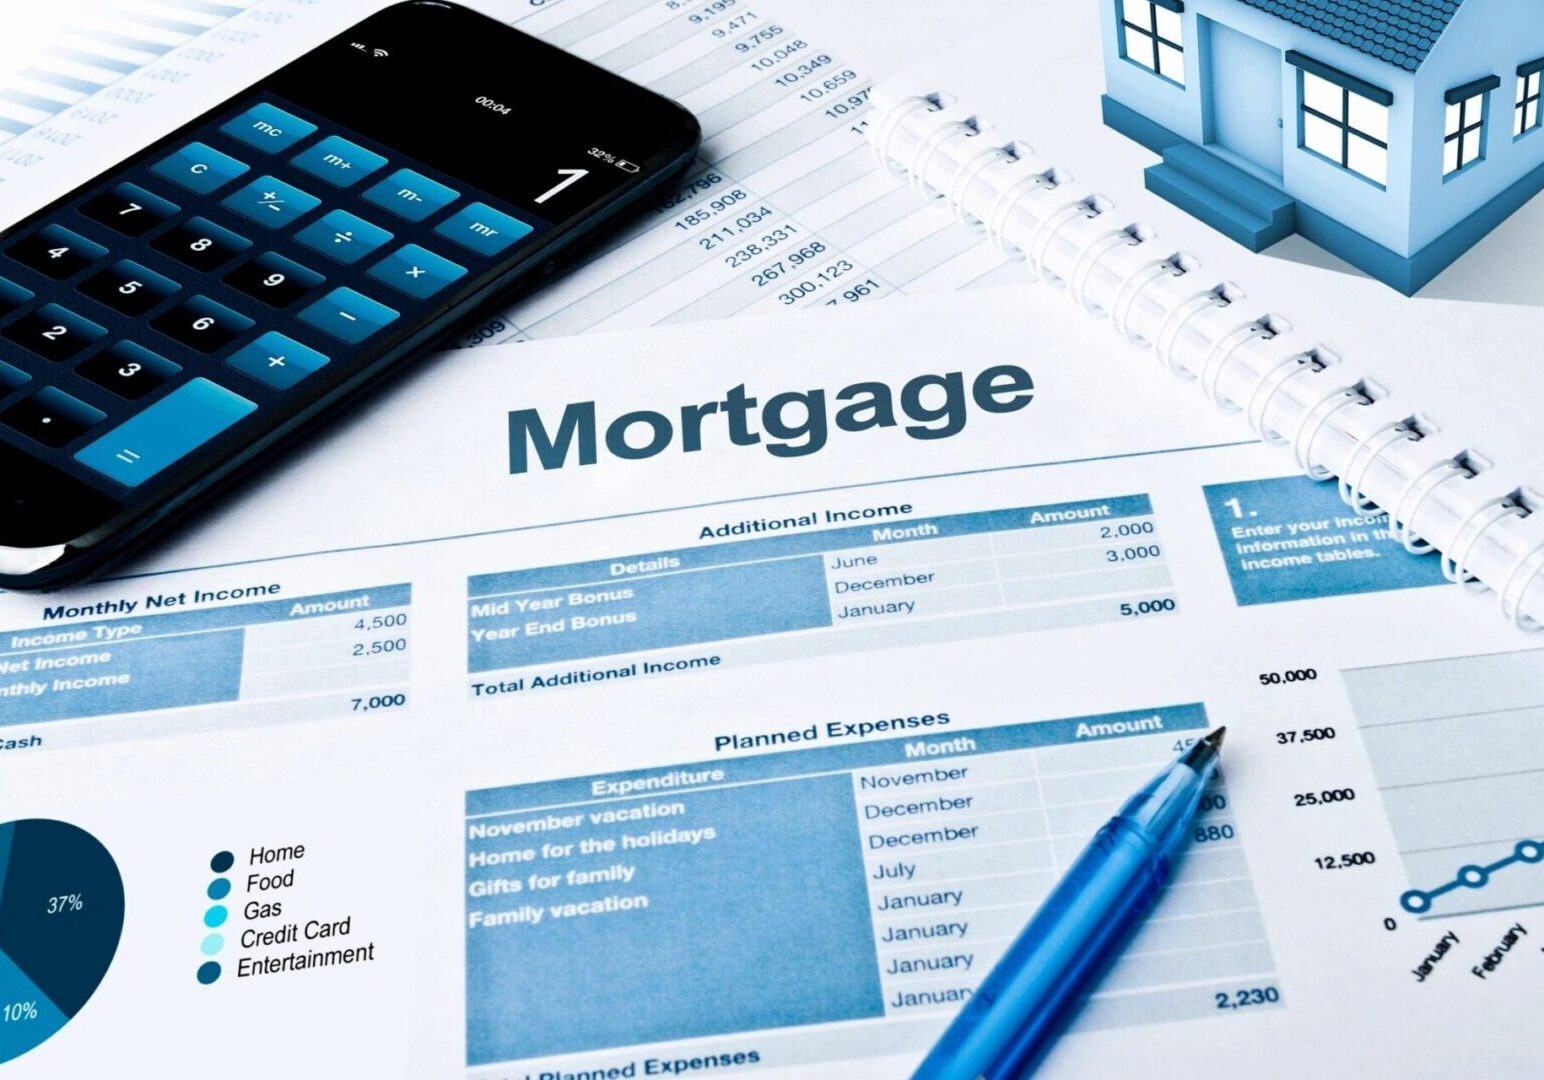 A mortgage report with a phone calculator